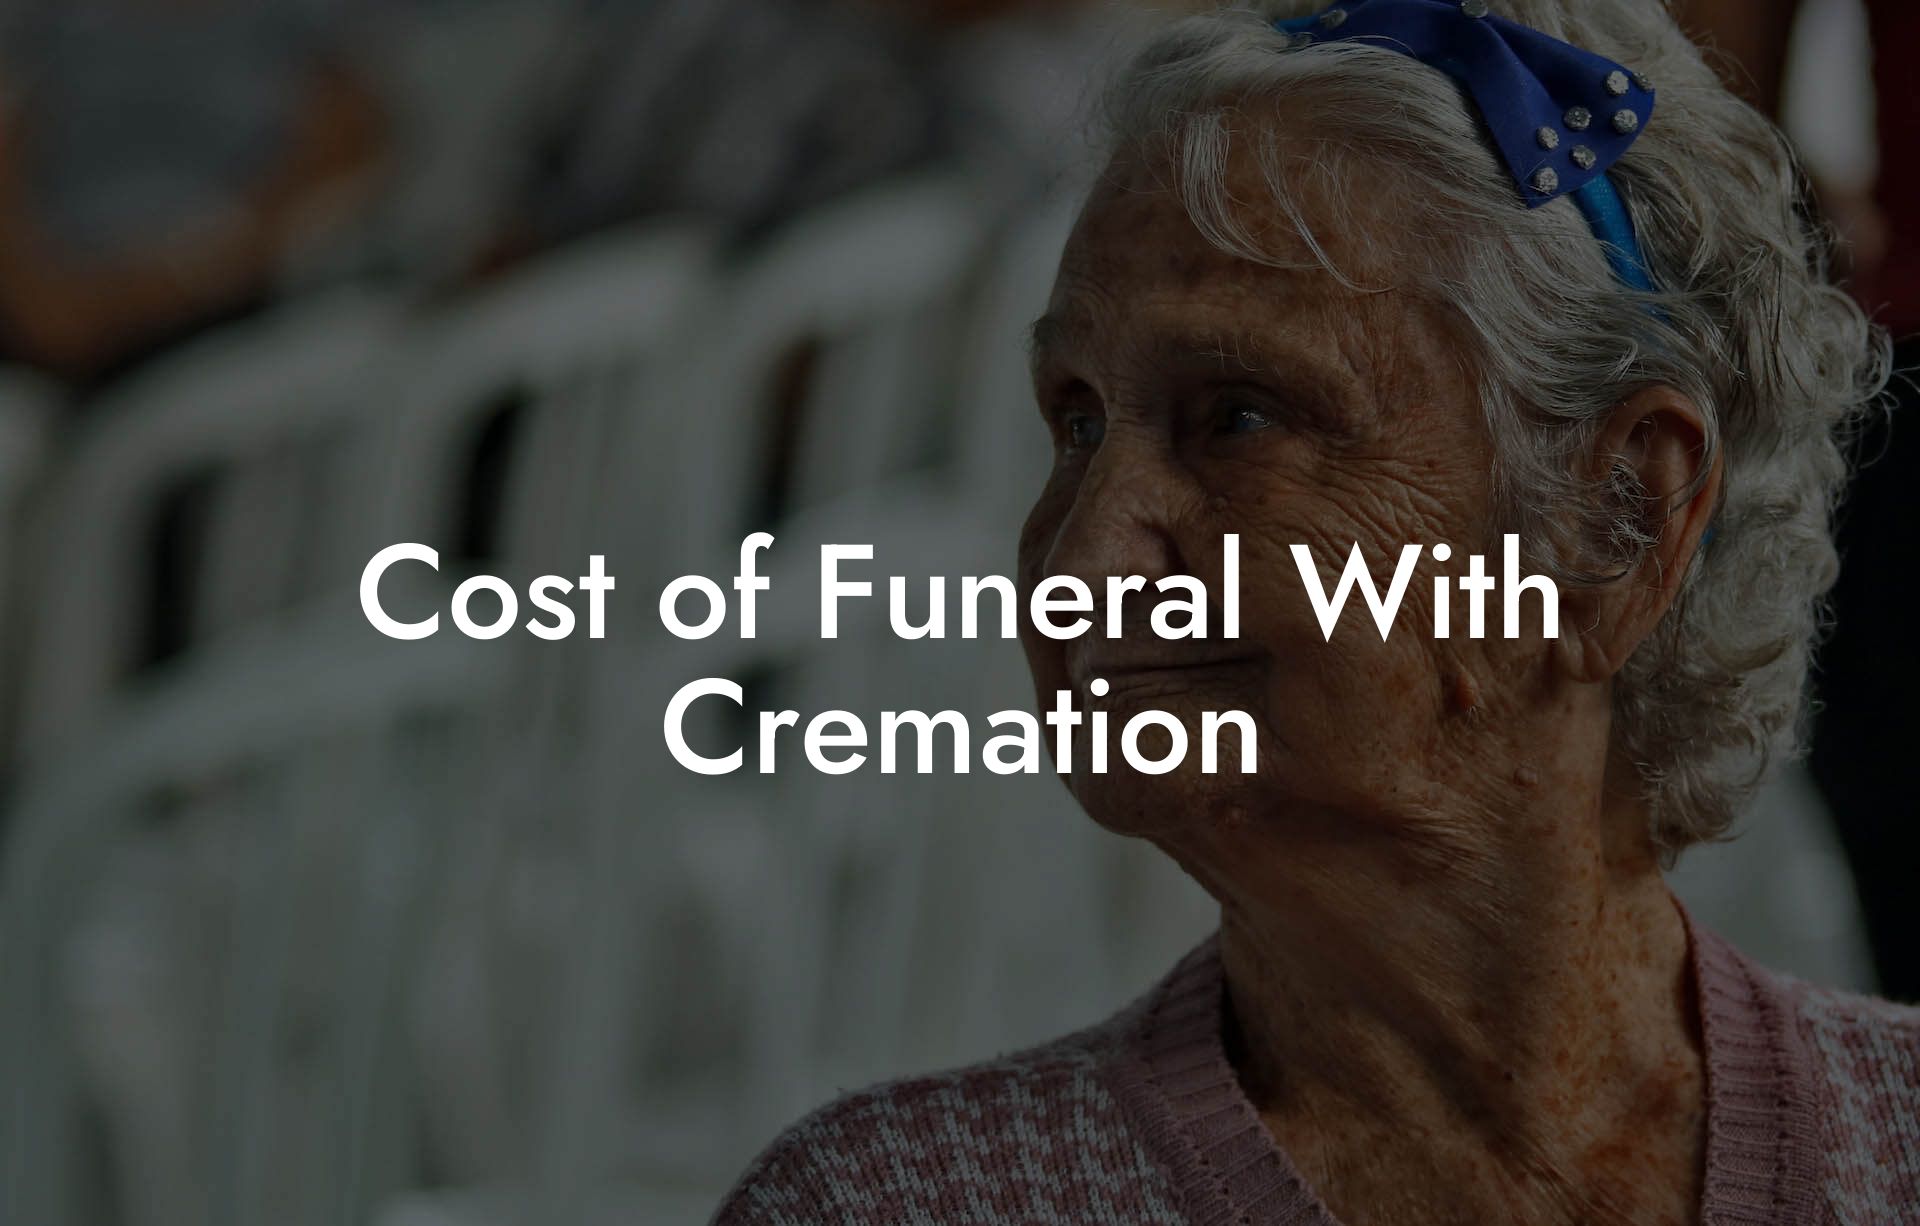 Cost of Funeral With Cremation